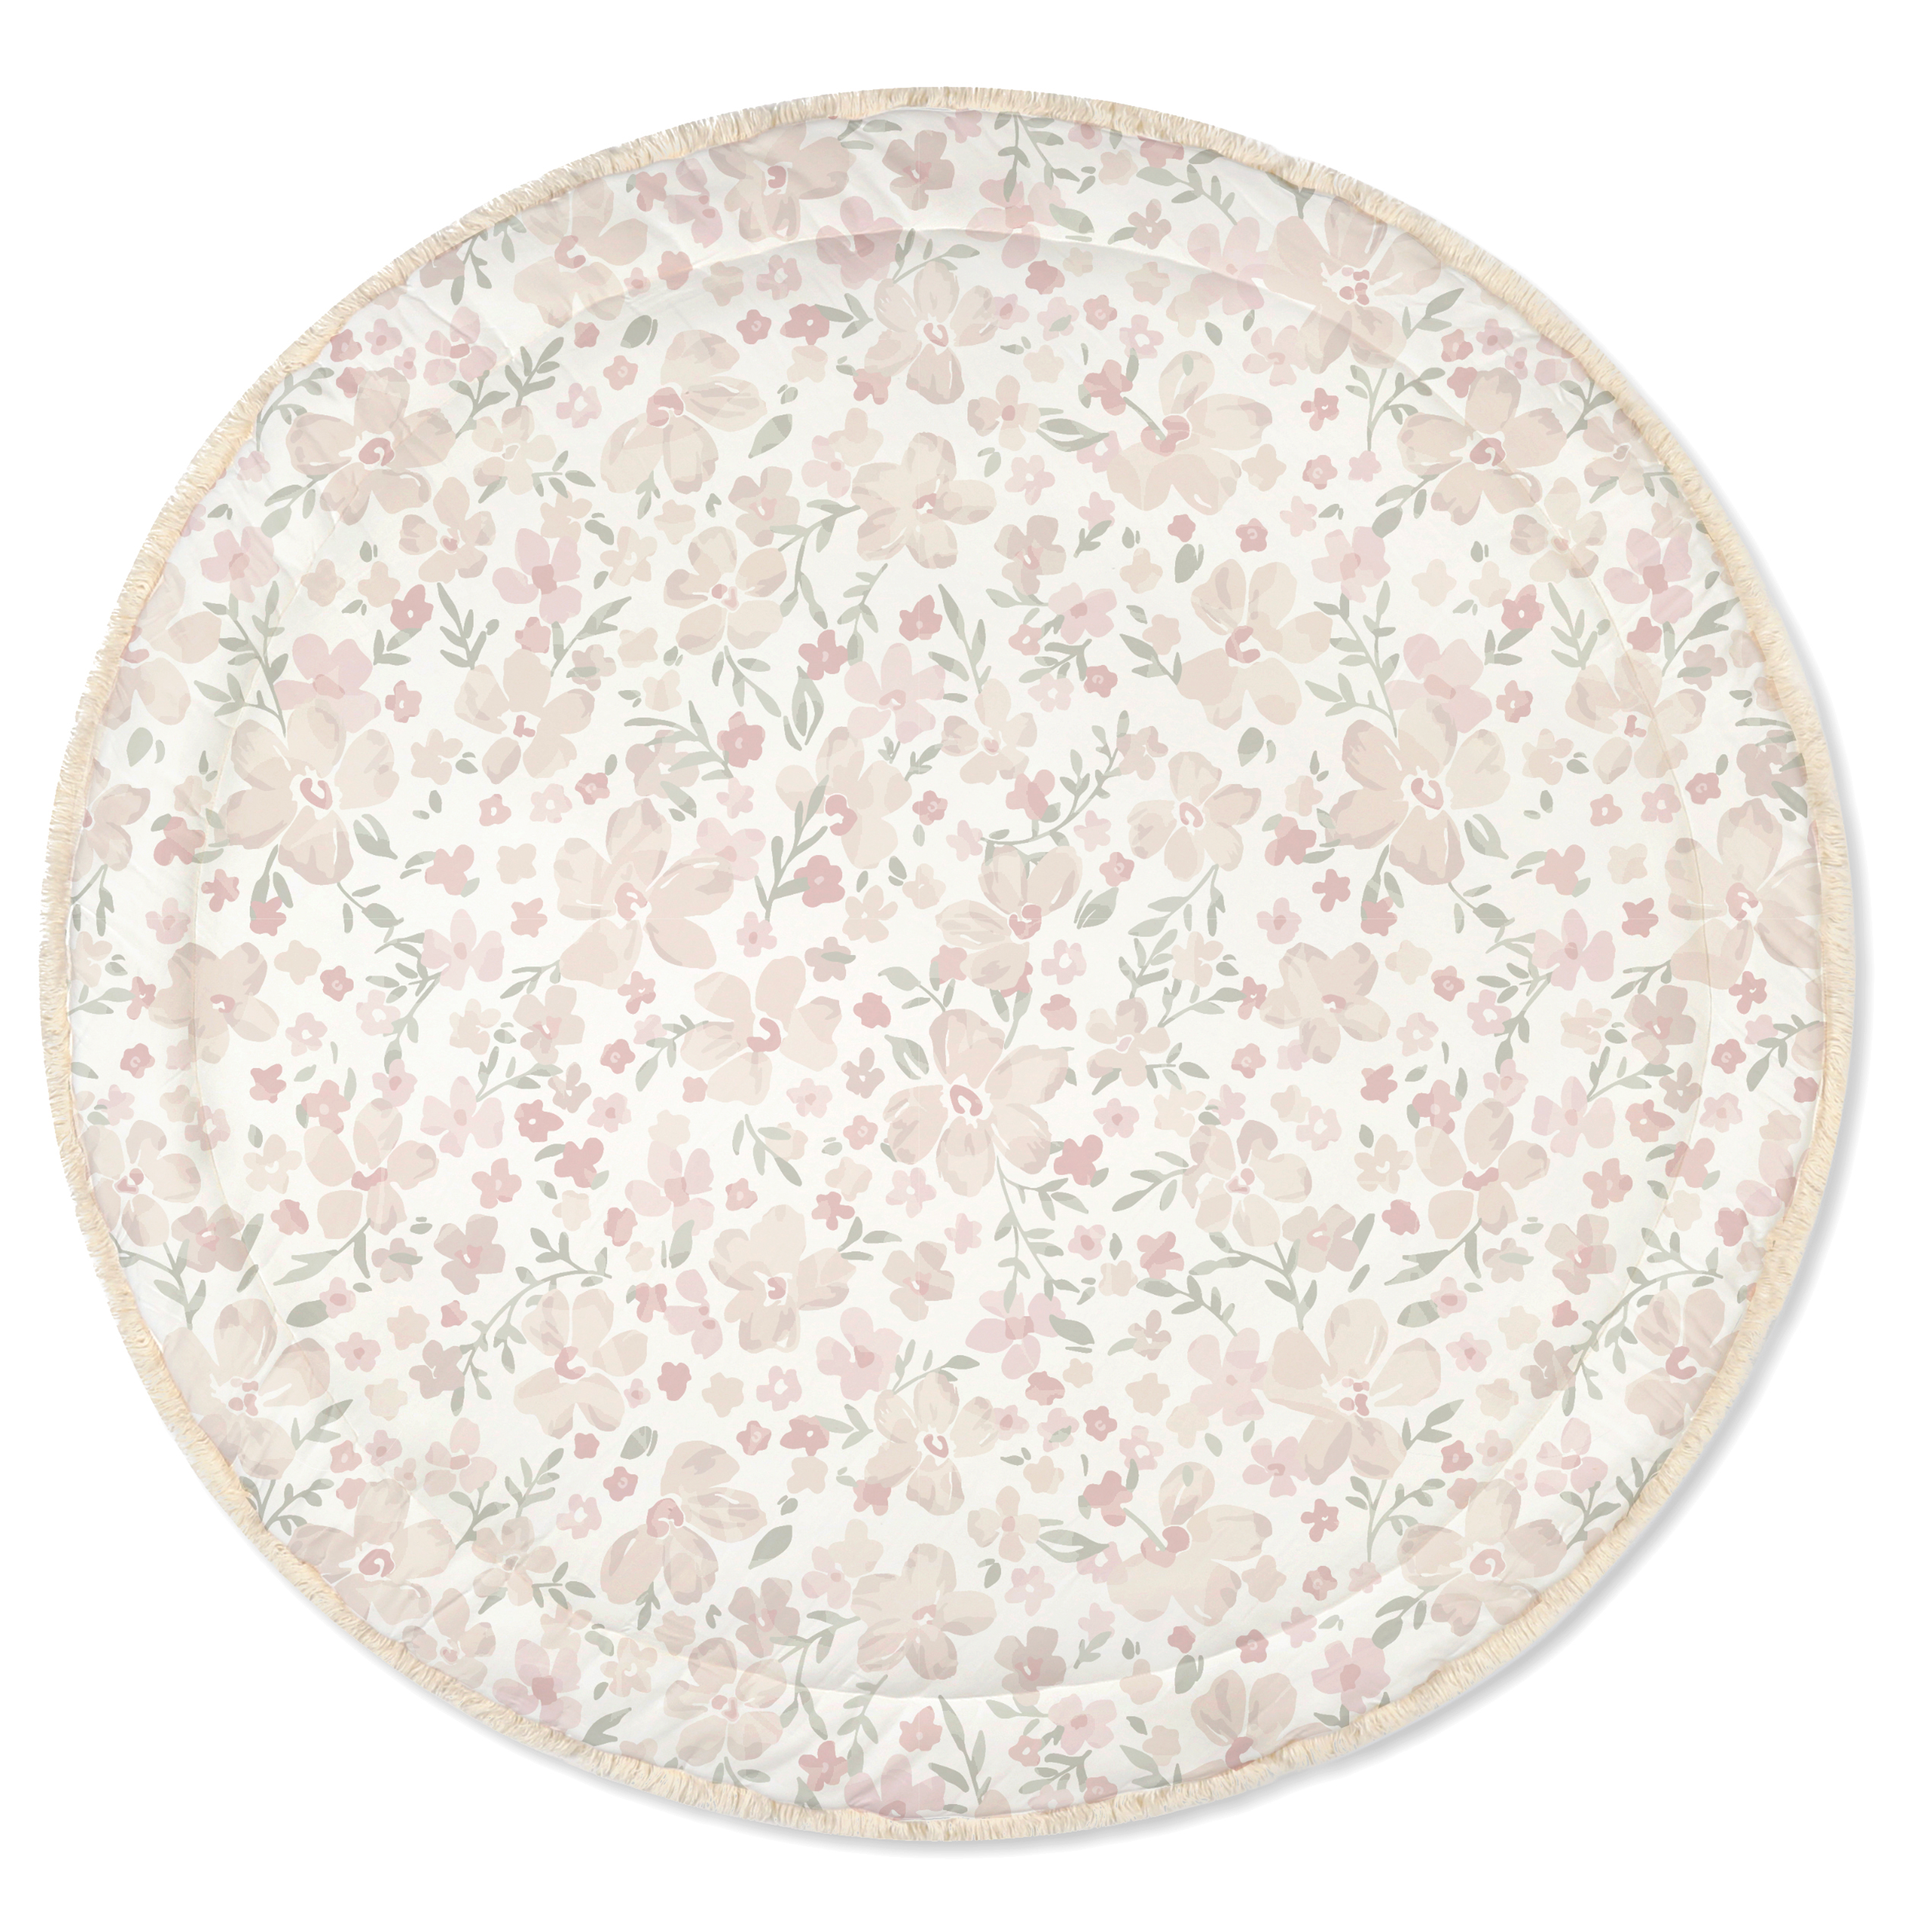 A round floral rug with a pattern of pink and green flowers and leaves on a cream background, bordered by a light beige edge.